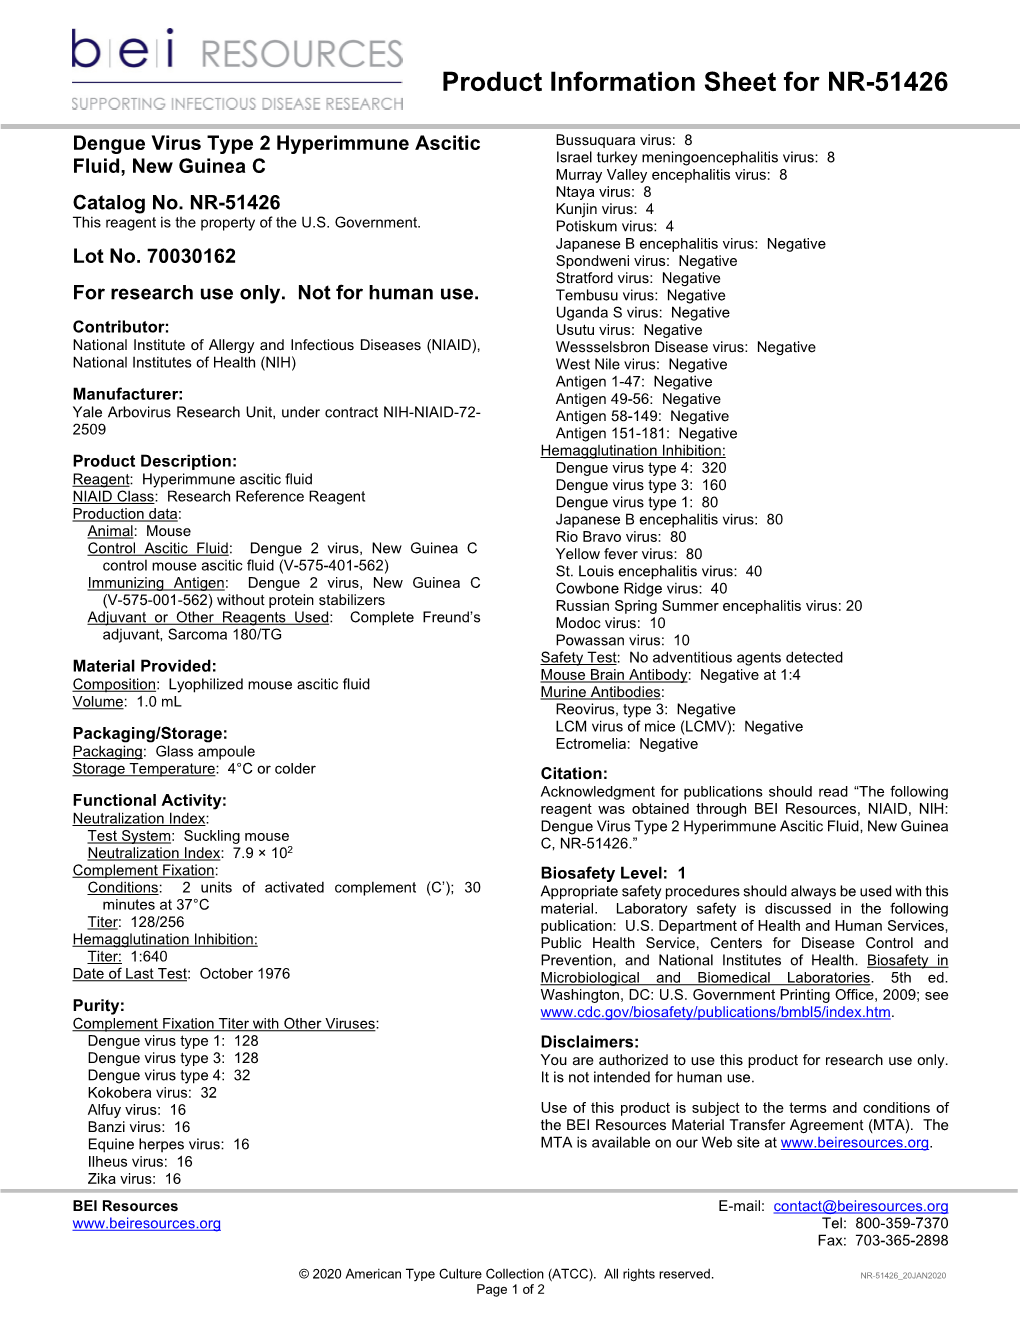 BEI Resources Product Information Sheet Catalog No. NR-51426